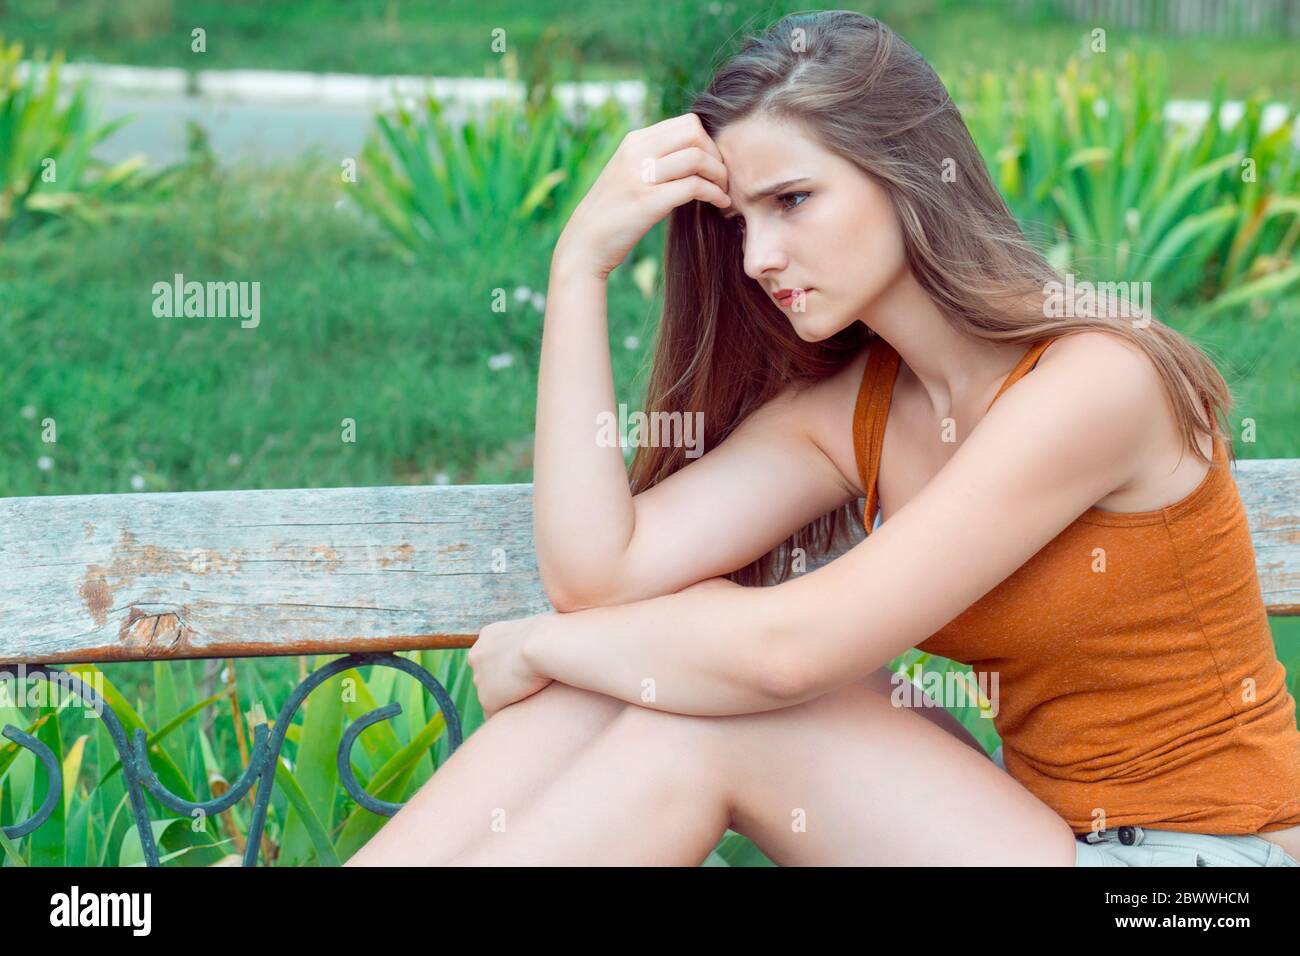 Thoughtful and sad girl. Portrait of one woman looking down sadly thinking sitting on a bench in a green park outdoors background in summer. Horizonta Stock Photo